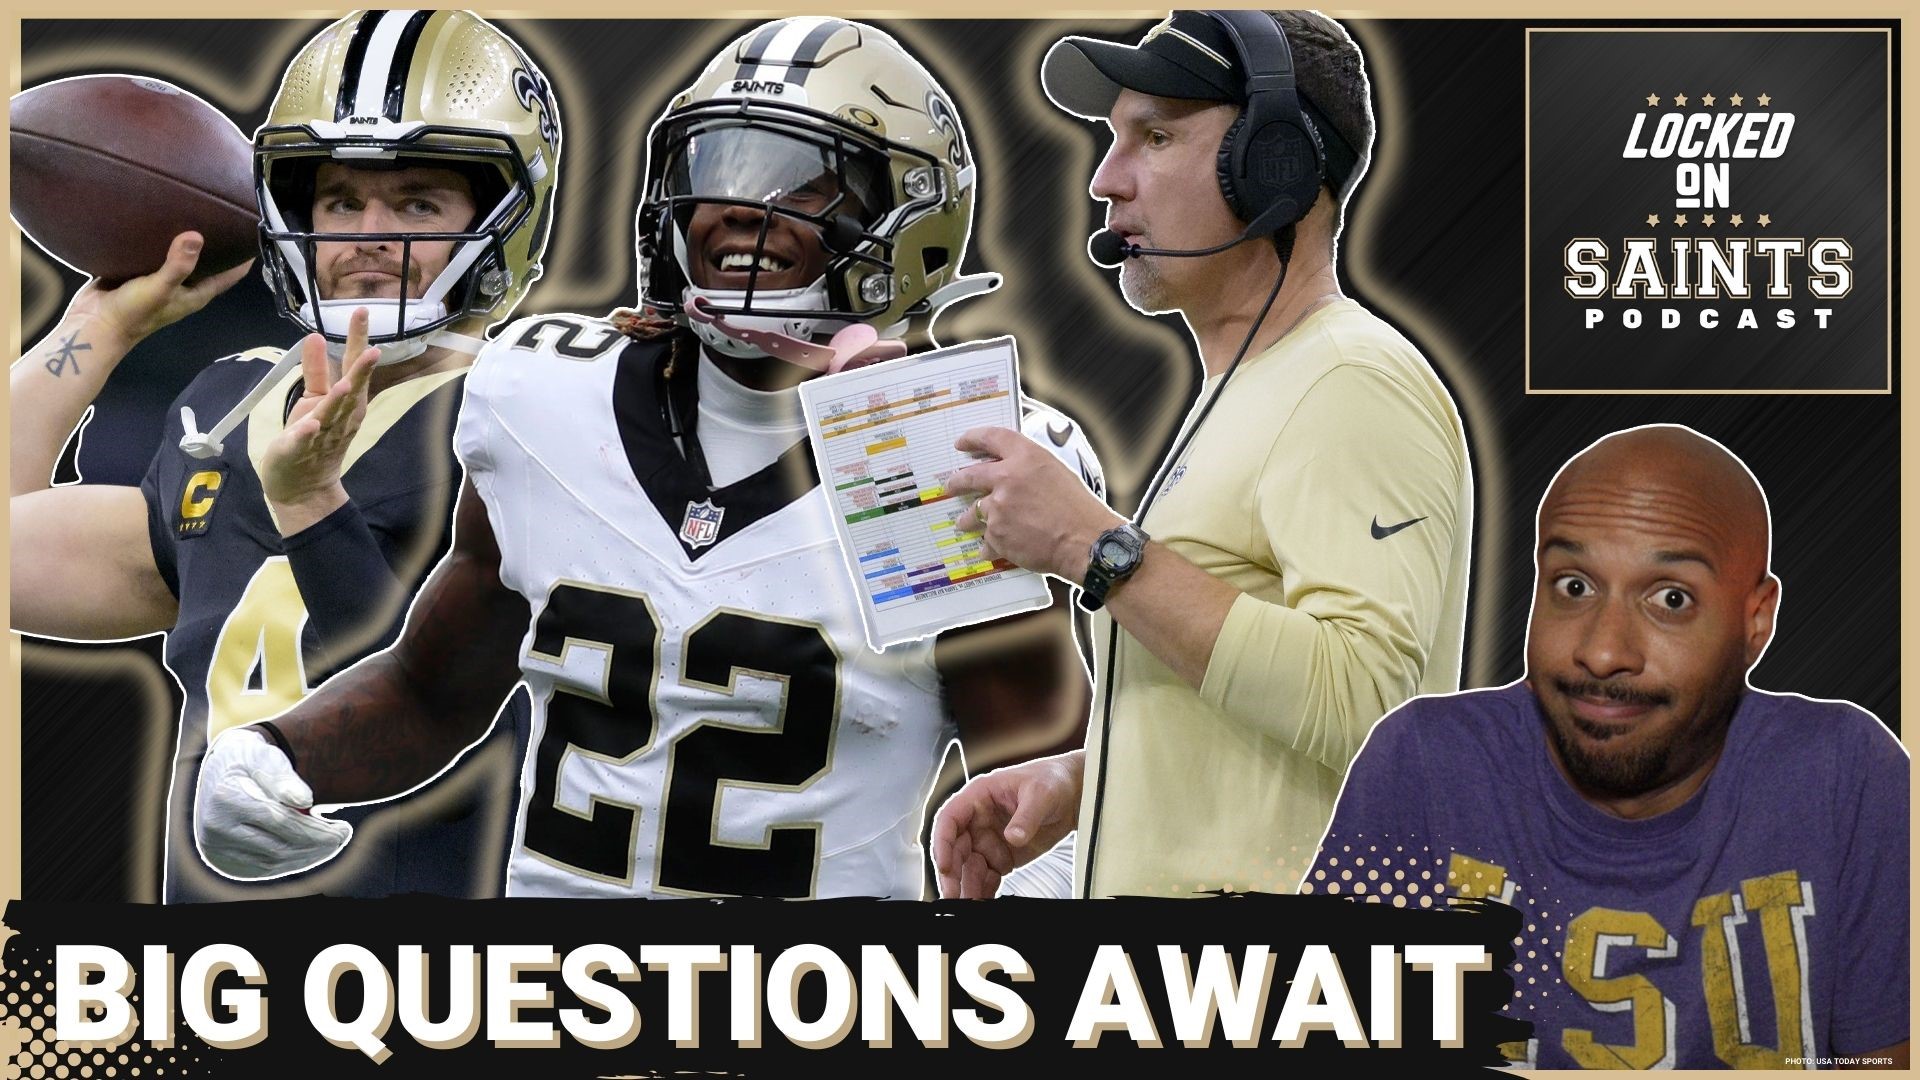 Questions New Orleans Saints must answer to justify play caller decision